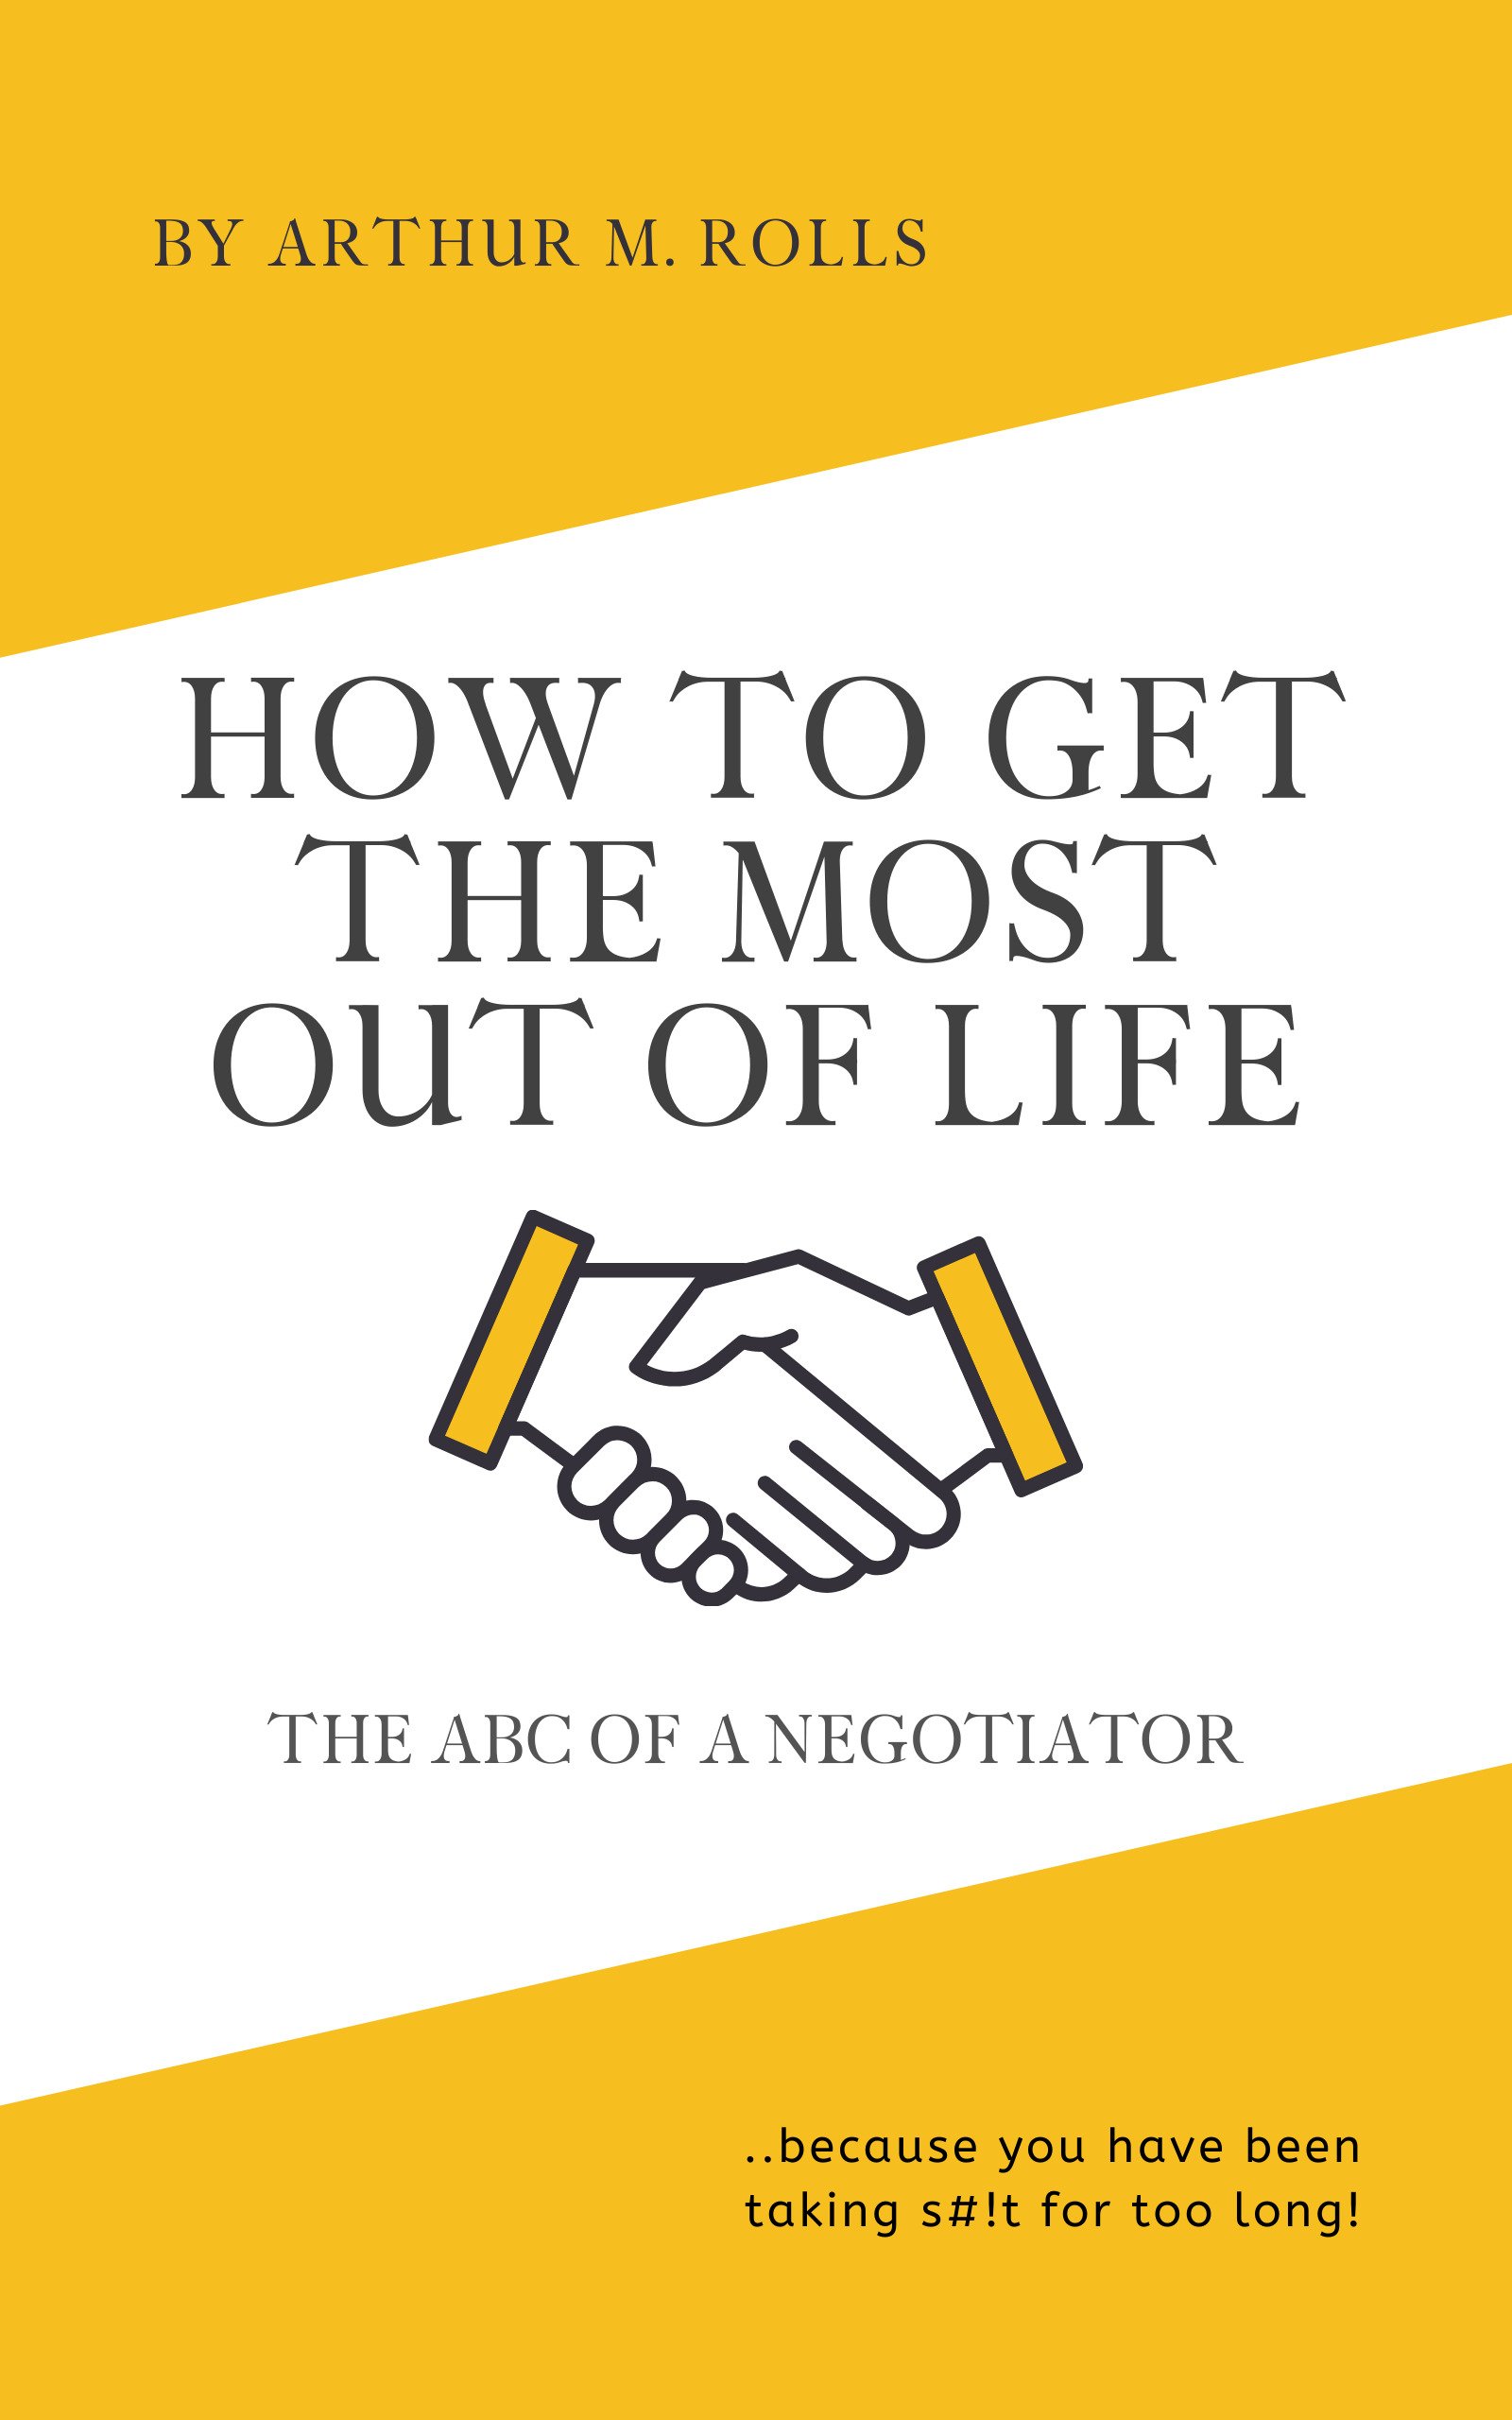 FREE: How To Get The Most Out Of Life by Arthur M. Rolls